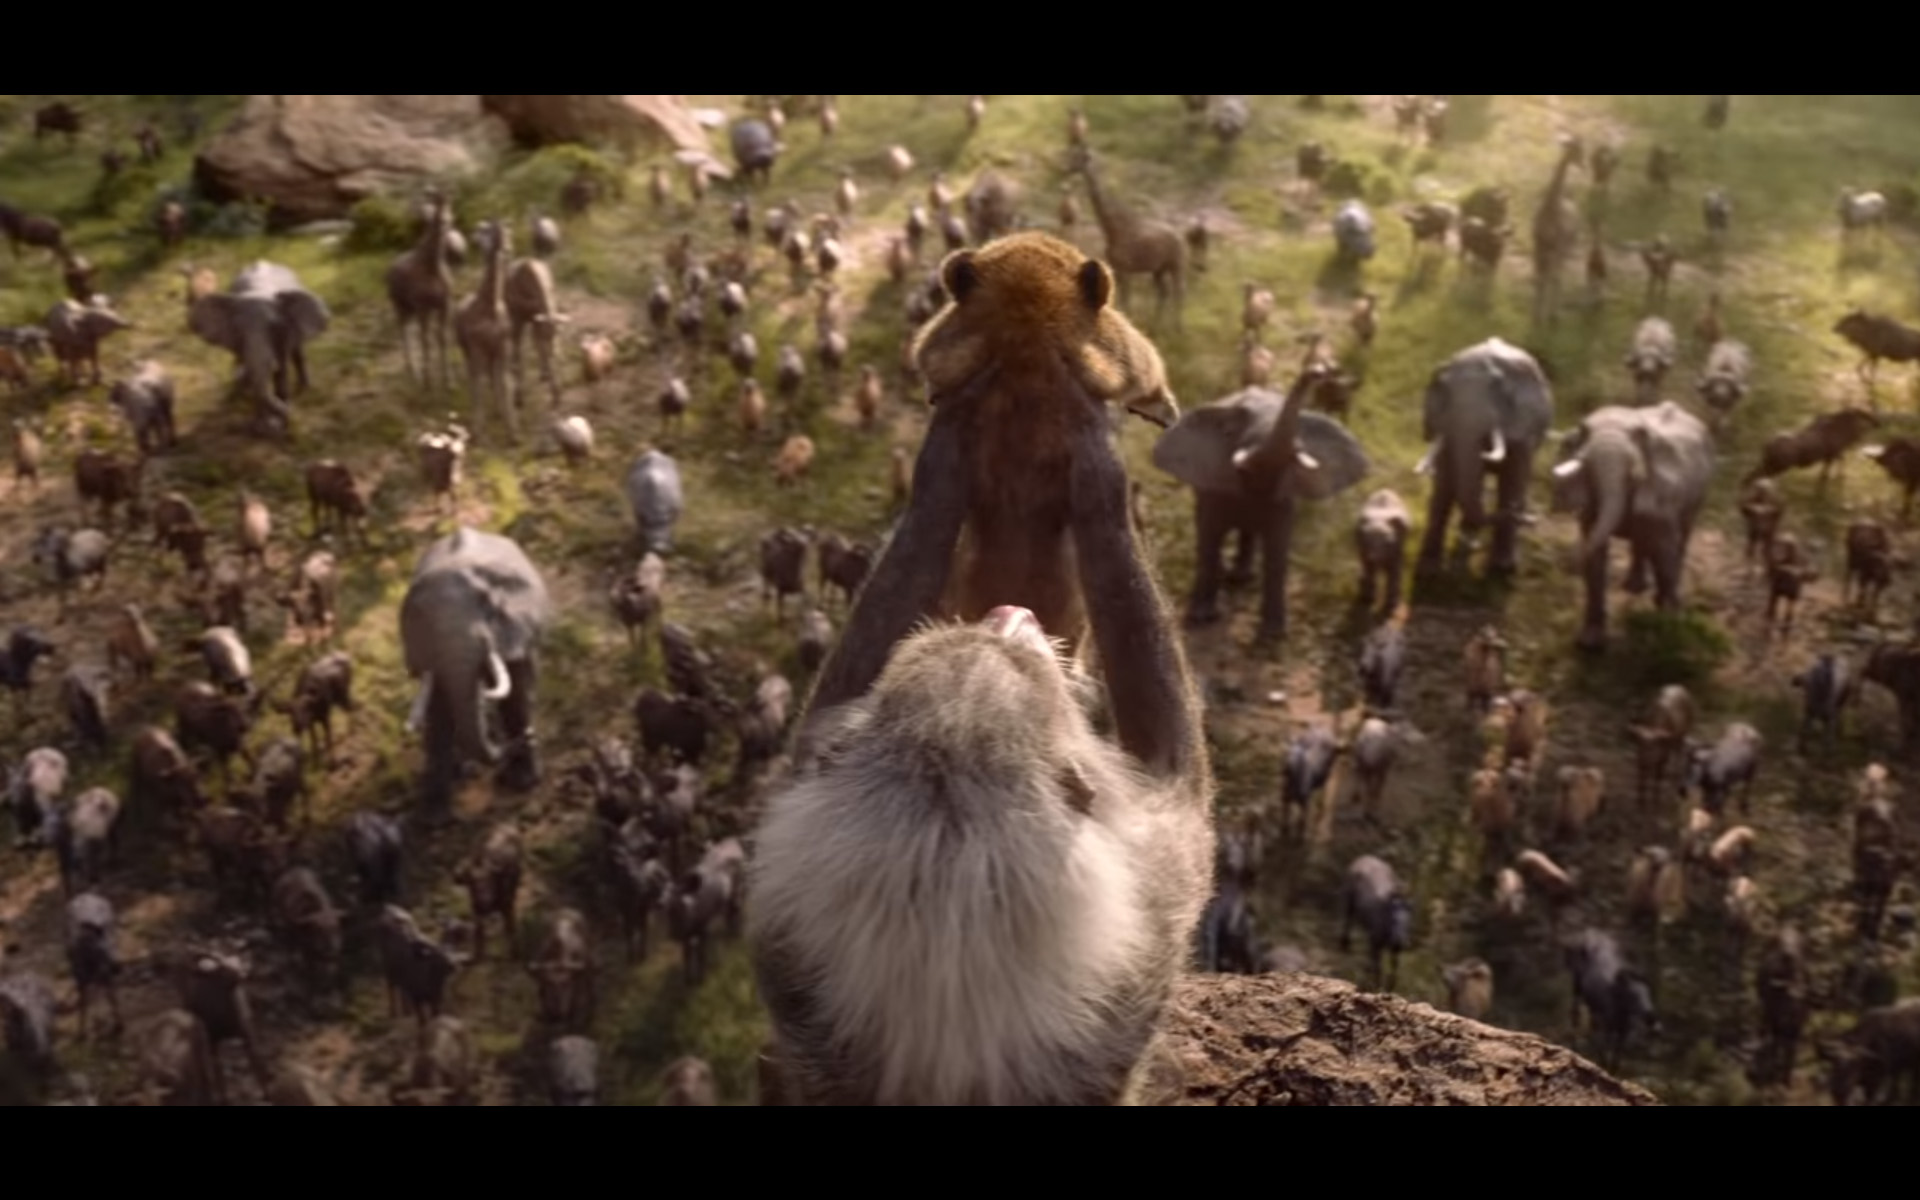 PHOTO: Disney released a teaser trailer for the 2019 remake of, "The Lion King."